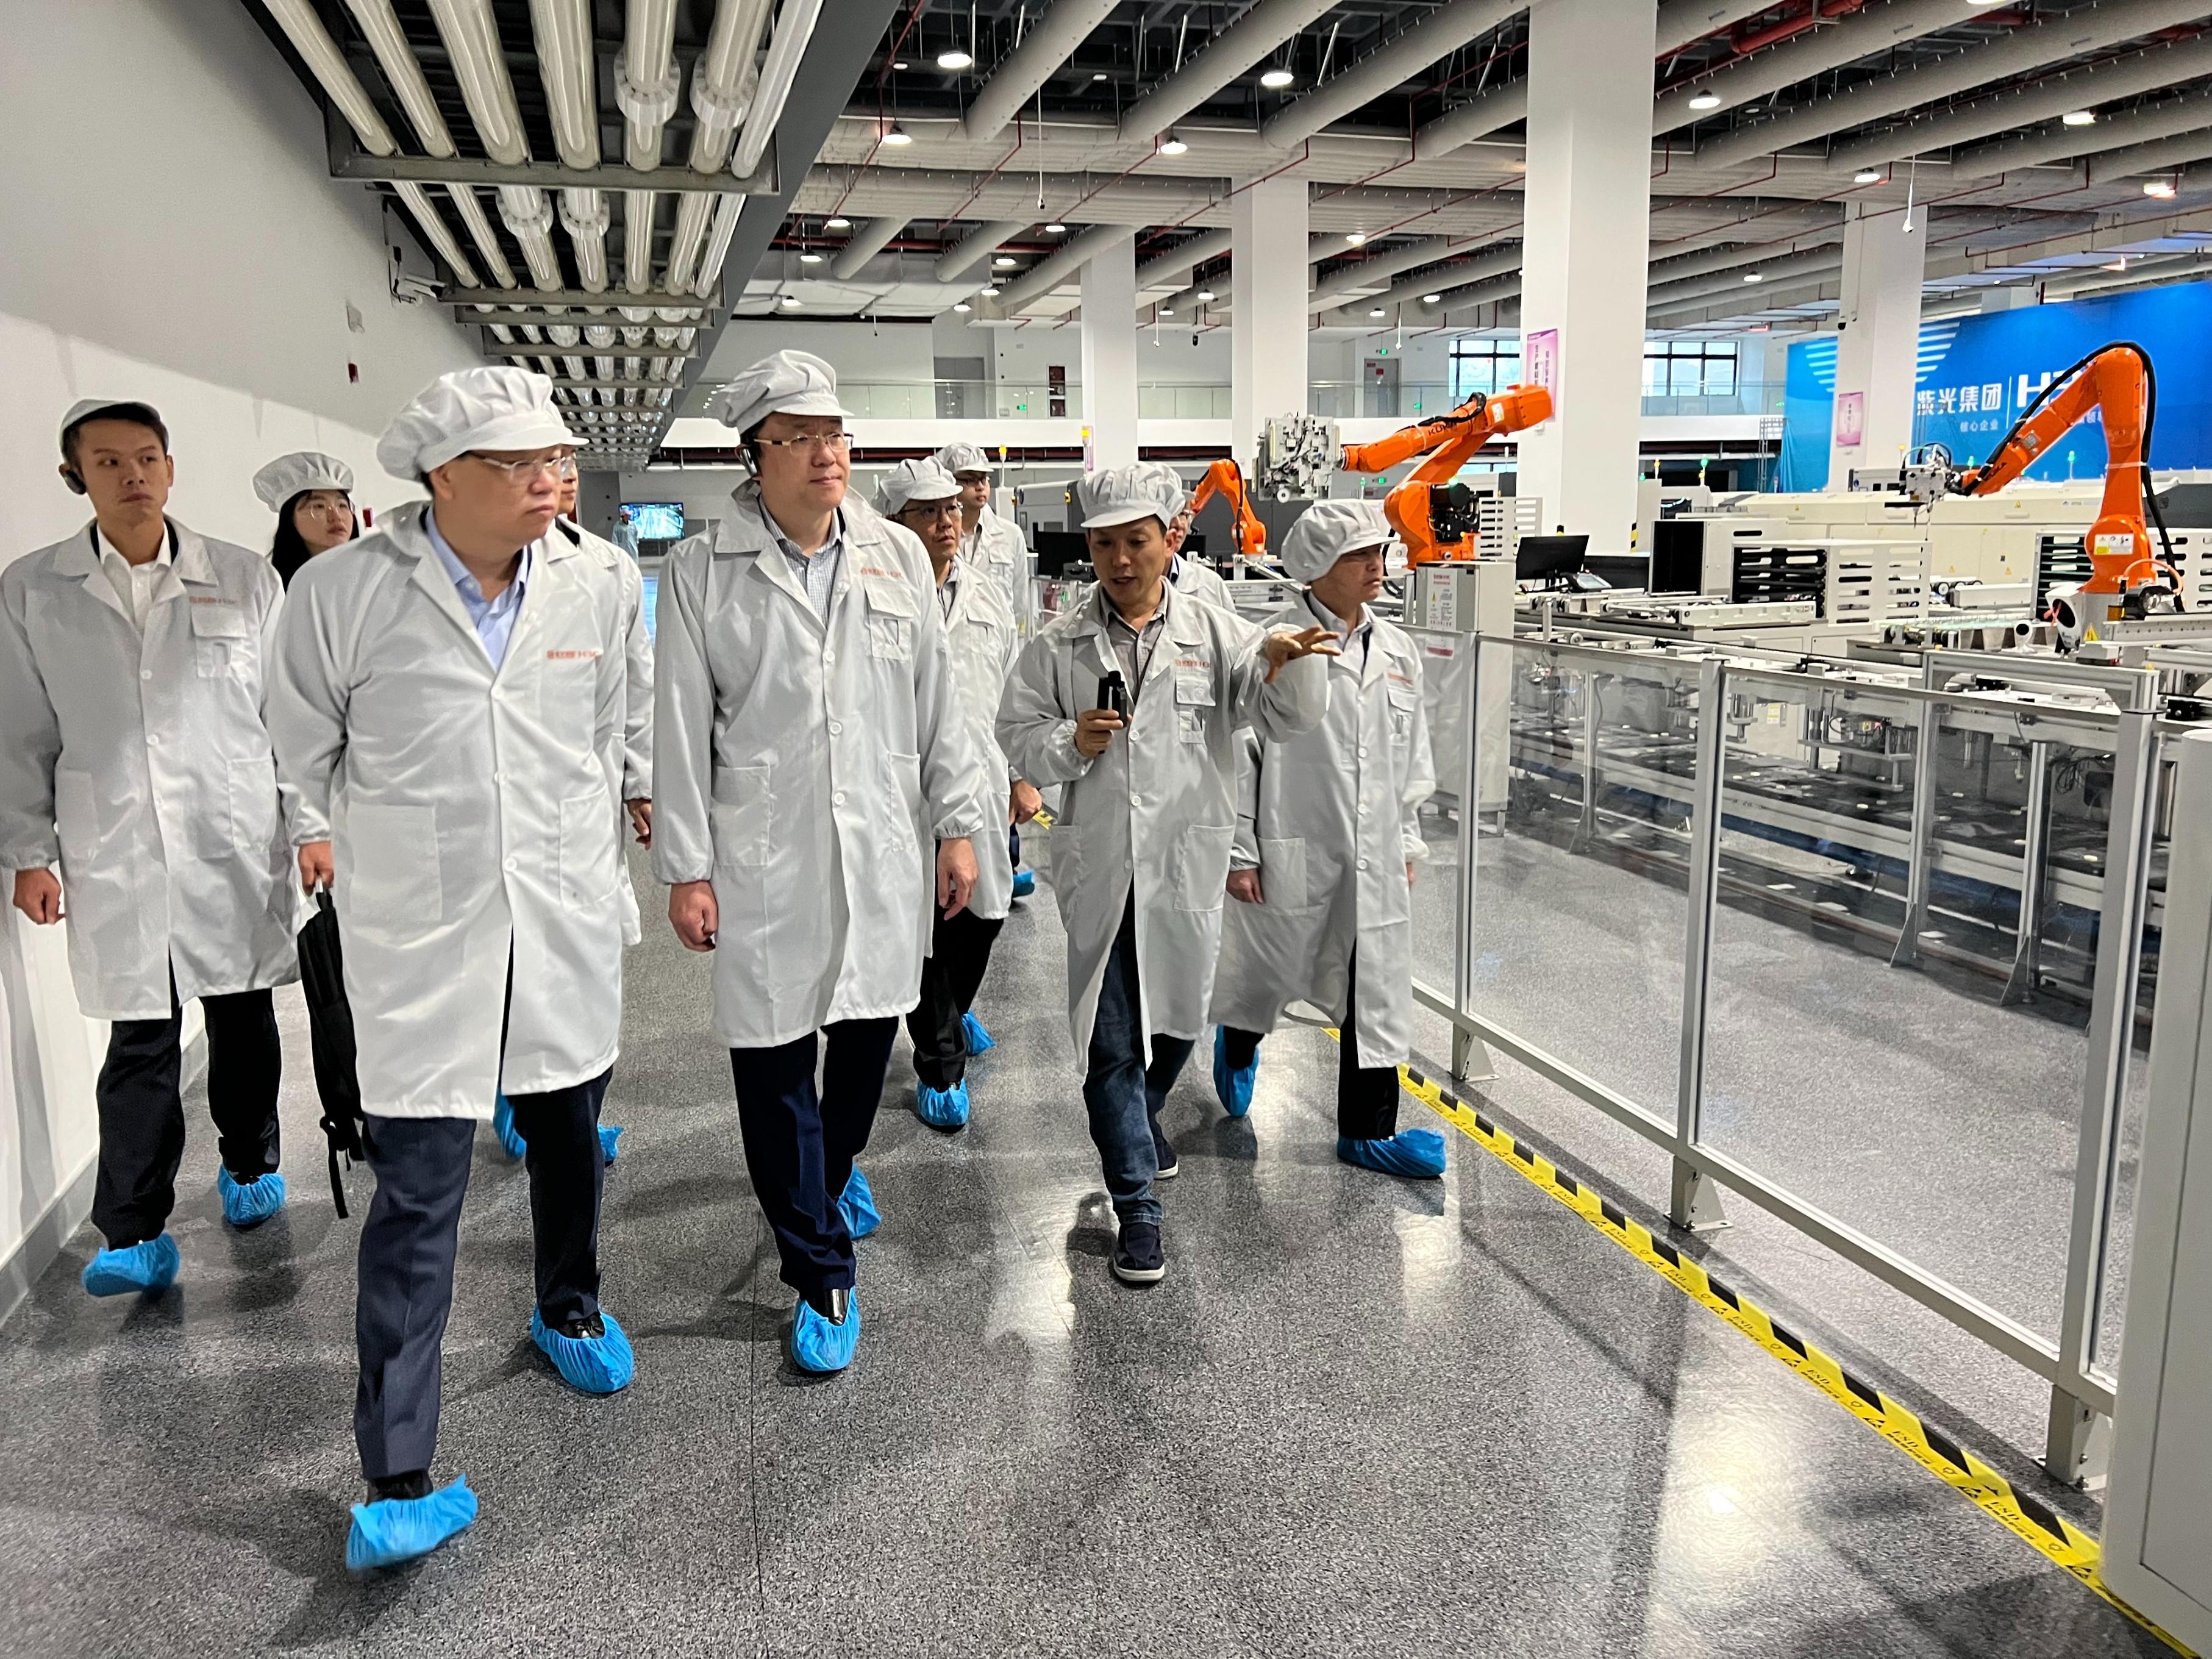 The Secretary for Innovation, Technology and Industry, Professor Sun Dong (front row, third left), together with the Government Chief Information Officer, Mr Tony Wong (front row, first right), conducts a study on the Hangzhou Headquarters of H3C, a subsidiary of Unisplendour Corporation Limited, today (November 8) by visiting the headquarters’ future factory.